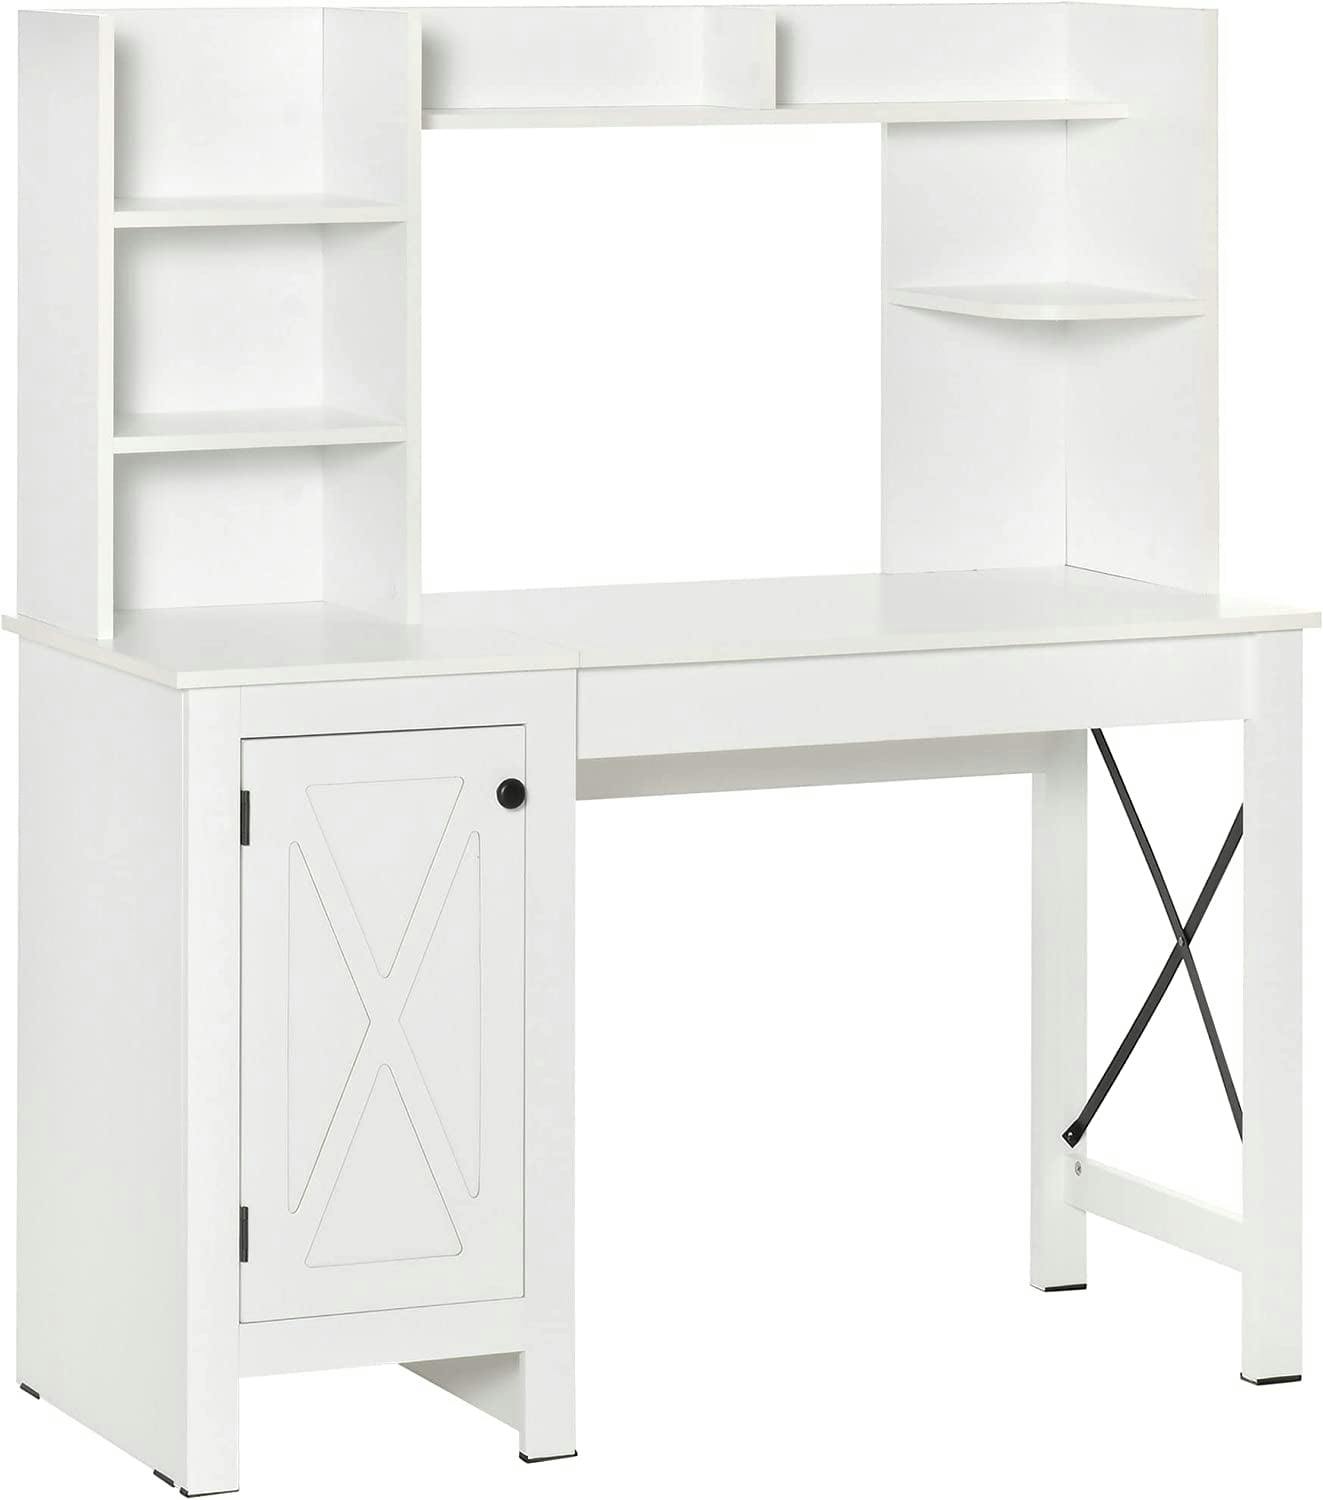 Farmhouse White 99cm Wood Computer Desk with Hutch and Filing Cabinet